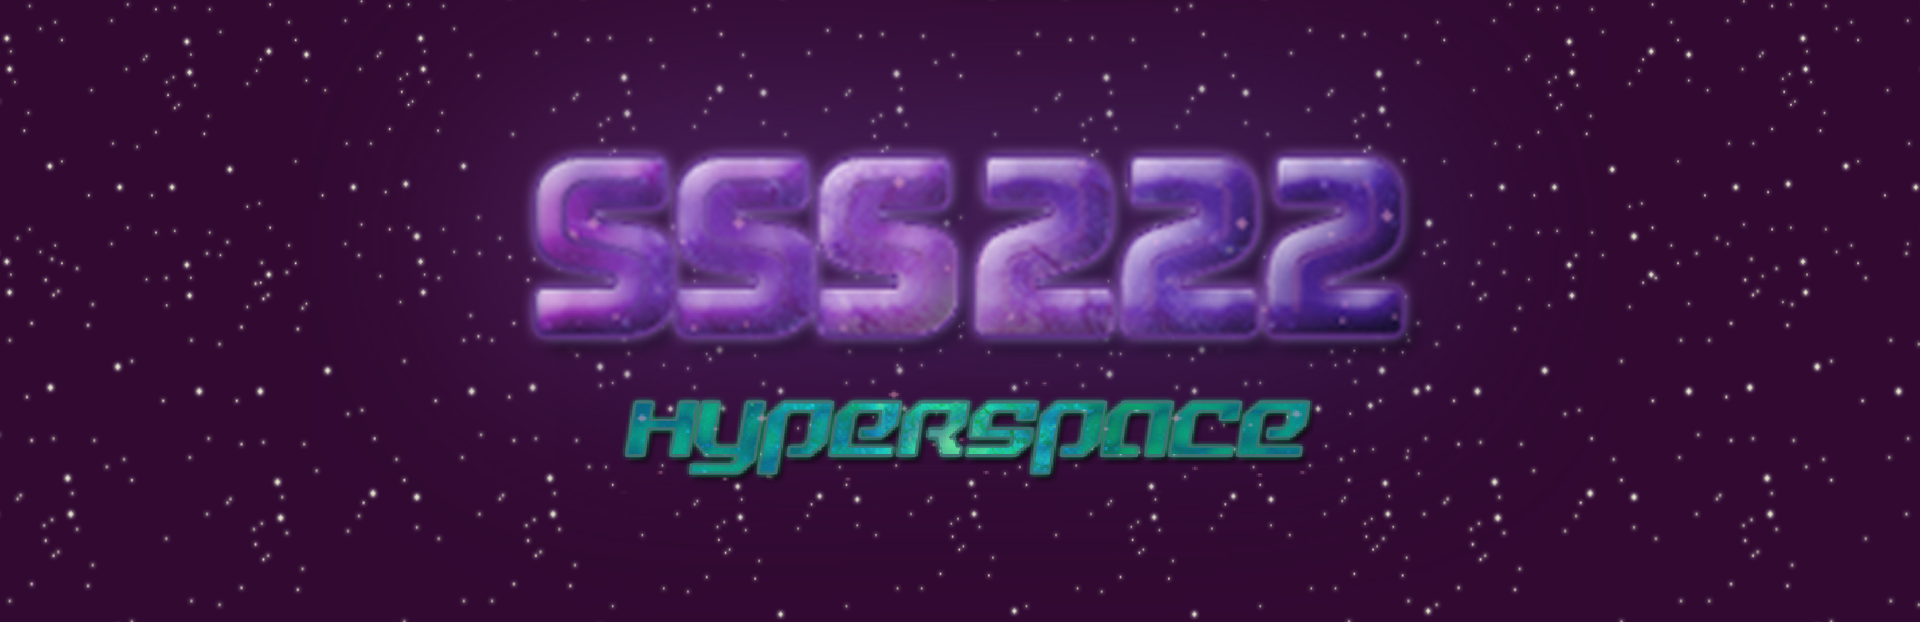 SSS222: HyperSpace